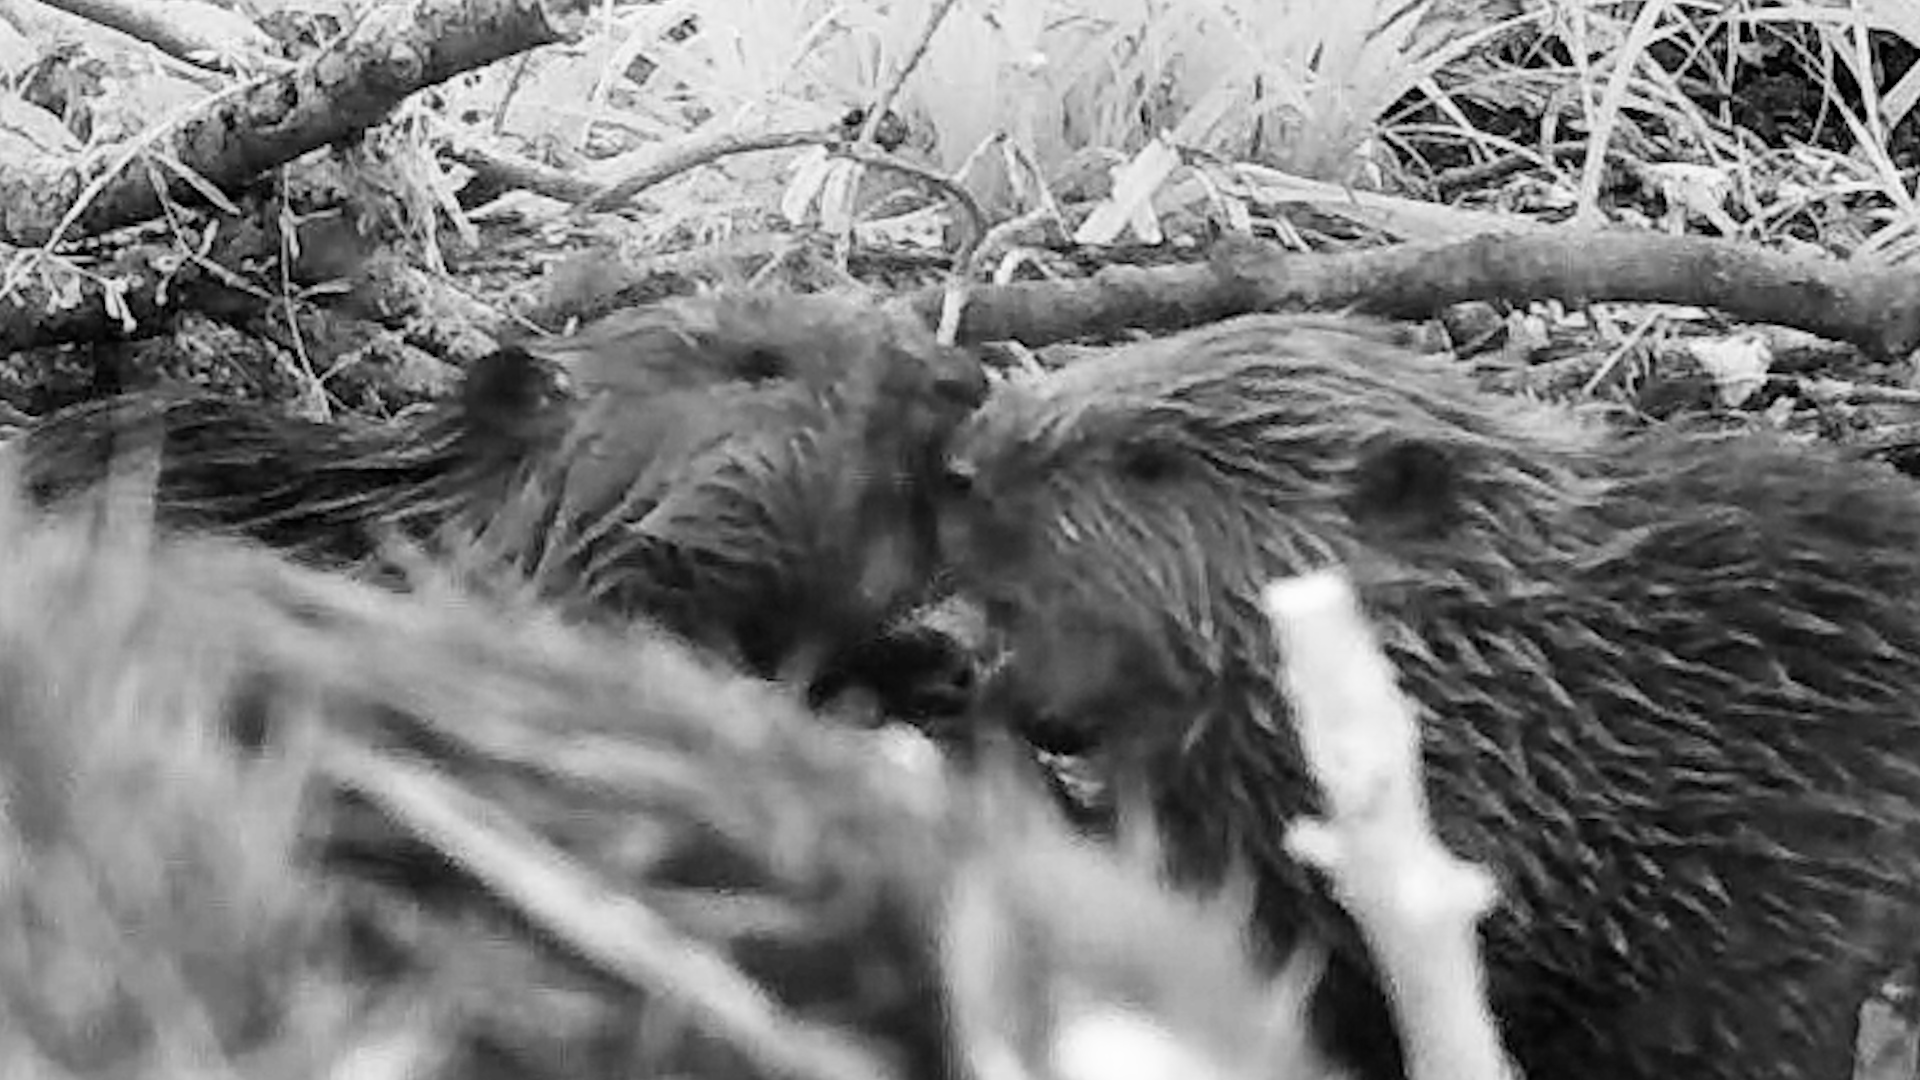 A black and white camera trap image of two beaver kits nose to nose